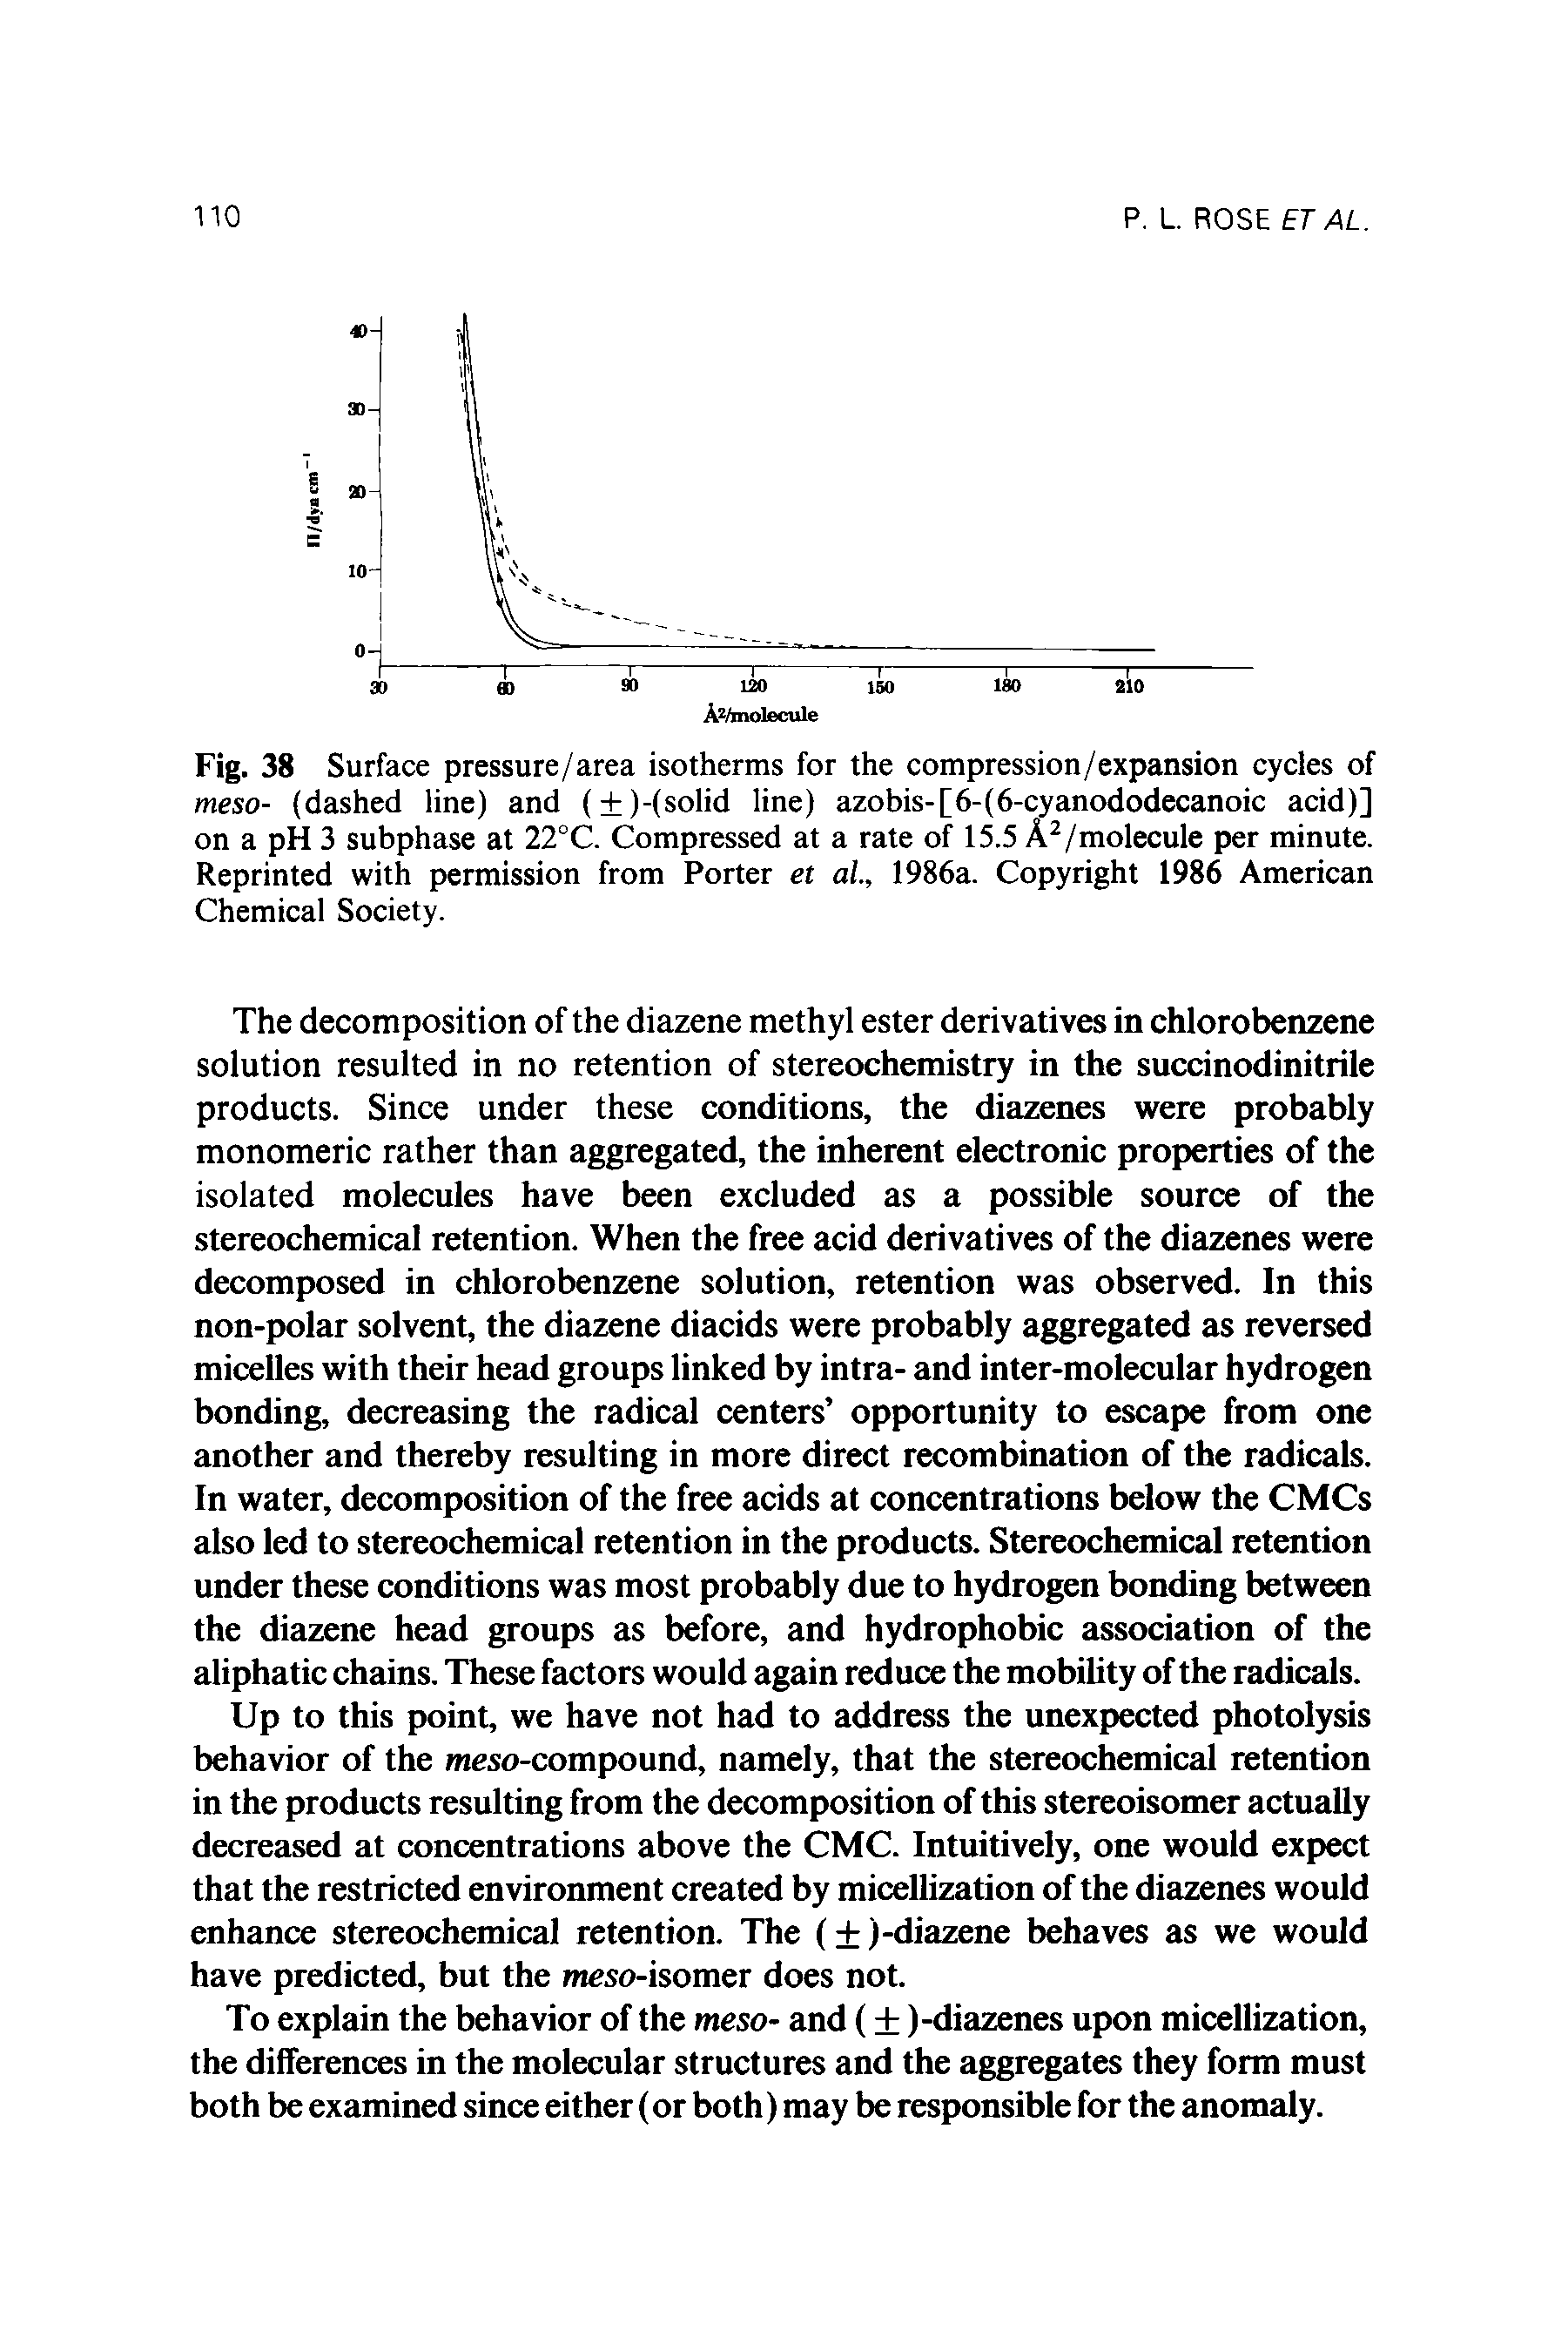 Fig. 38 Surface pressure/area isotherms for the compression/expansion cycles of meso- (dashed line) and ( )-(solid line) azobis-[6-(6-cyanododecanoic acid)] on a pH 3 subphase at 22°C. Compressed at a rate of 15.5 A2/molecule per minute. Reprinted with permission from Porter et al., 1986a. Copyright 1986 American Chemical Society.